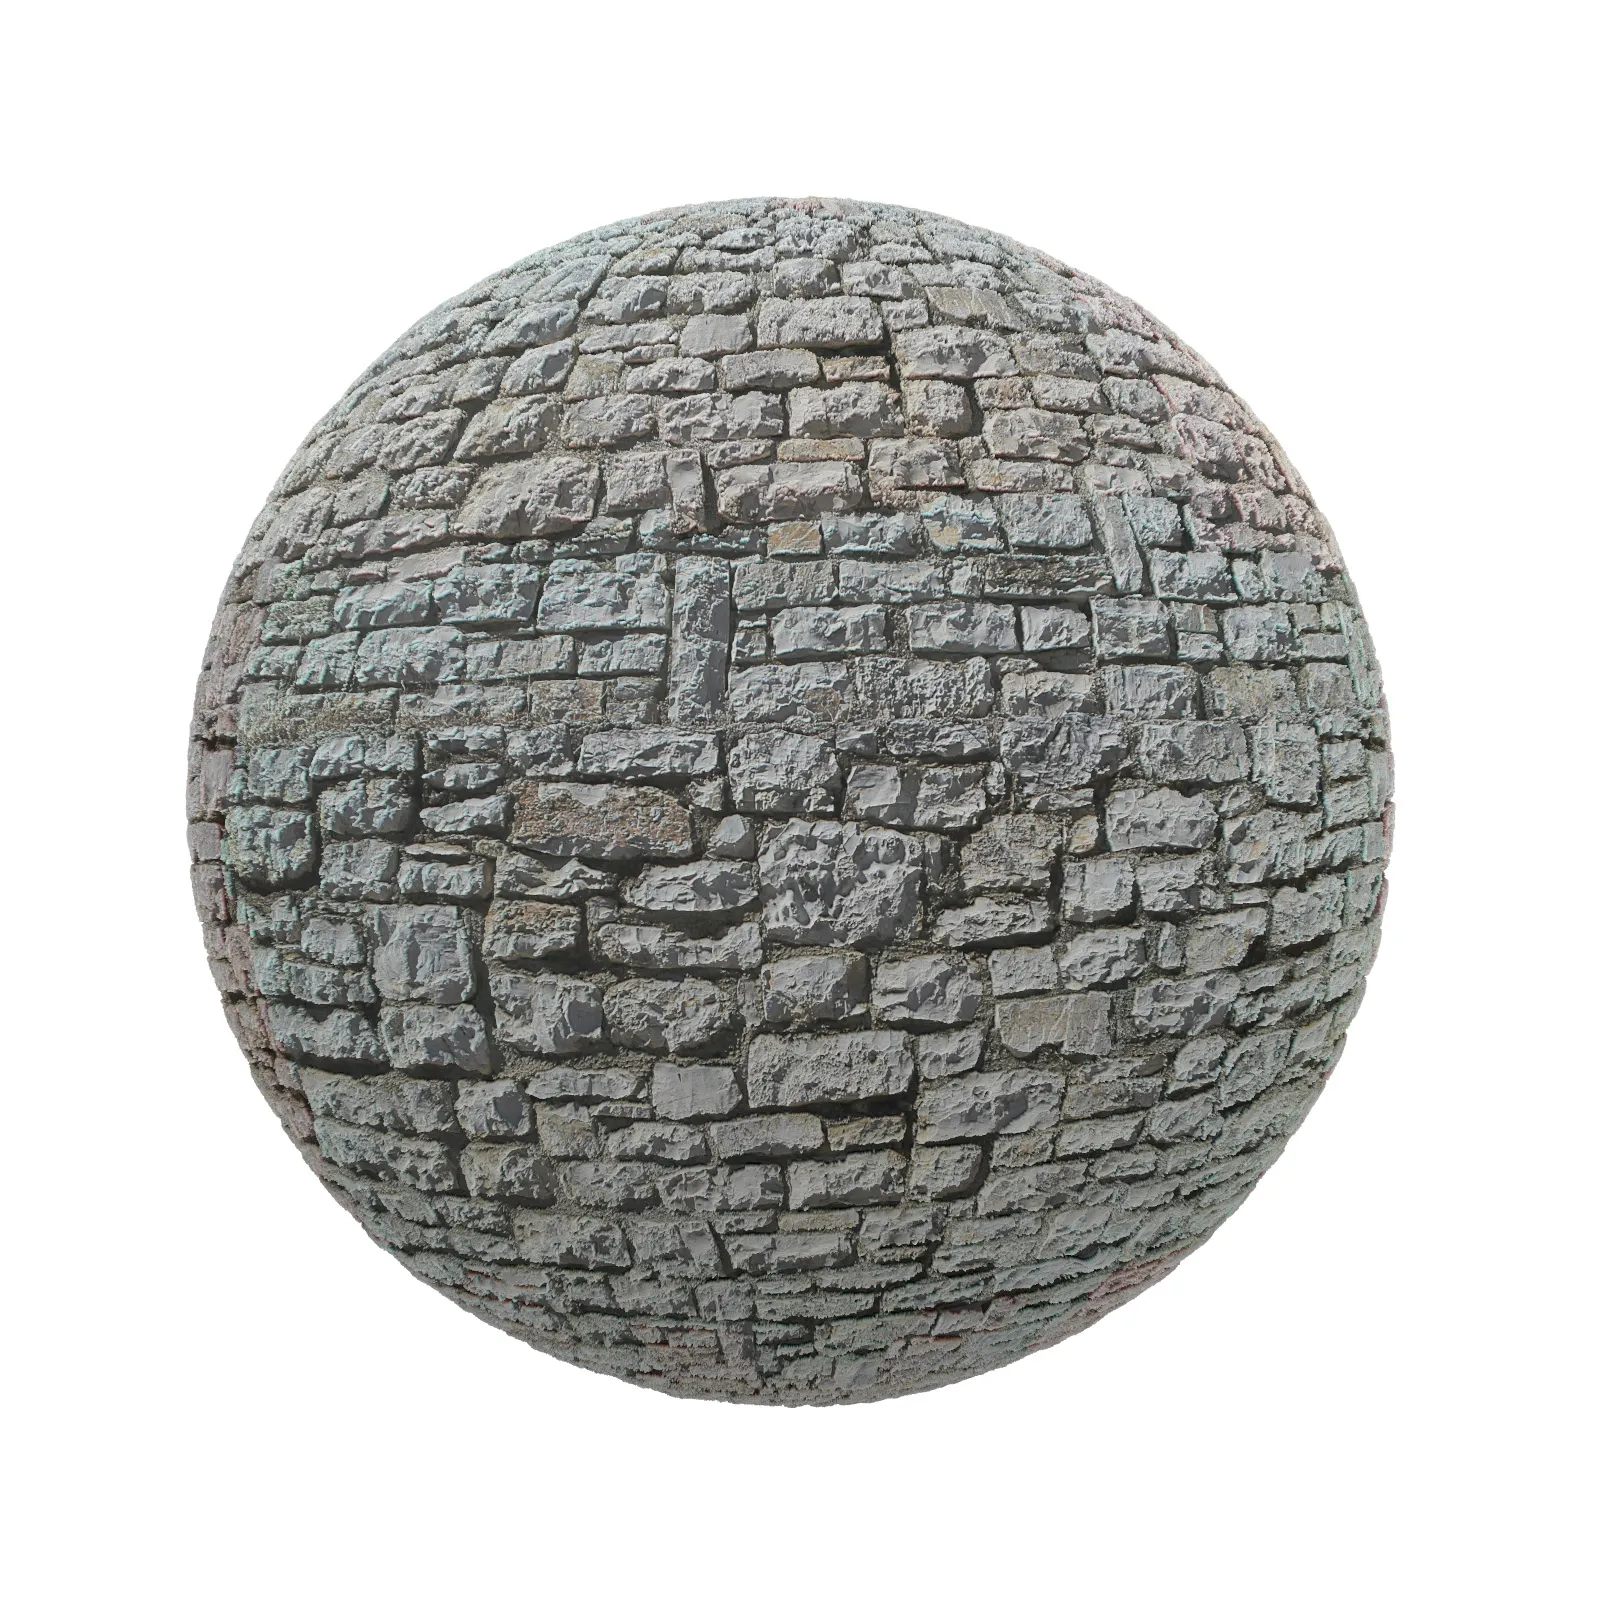 TEXTURES – STONES – CGAxis PBR Colection Vol 1 Stones – grey stone pavement